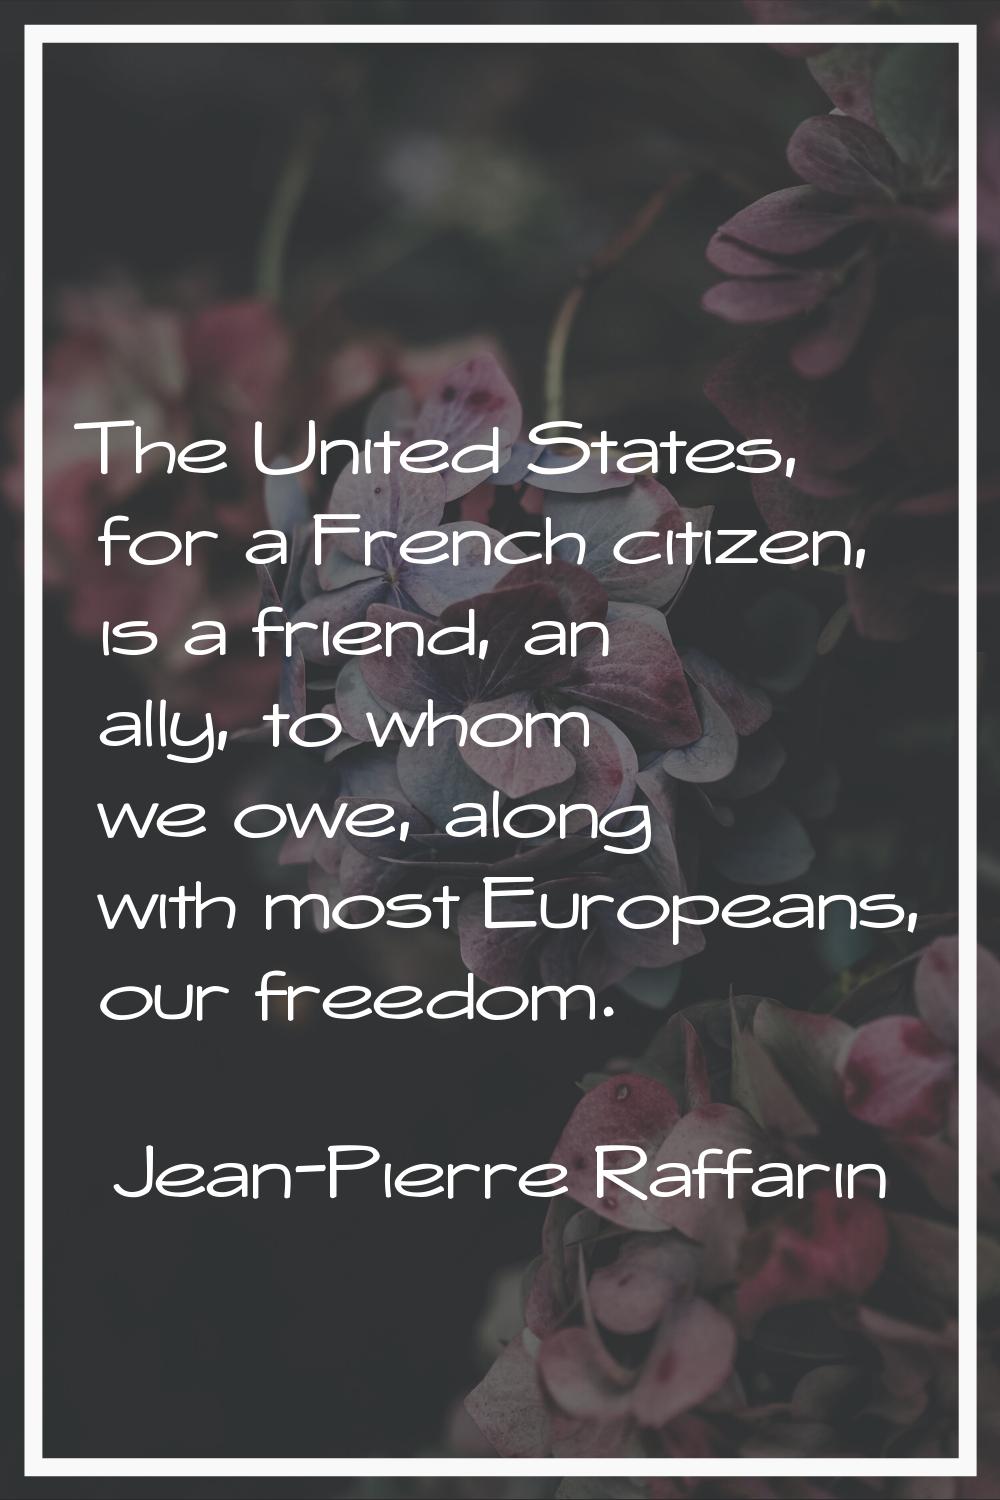 The United States, for a French citizen, is a friend, an ally, to whom we owe, along with most Euro